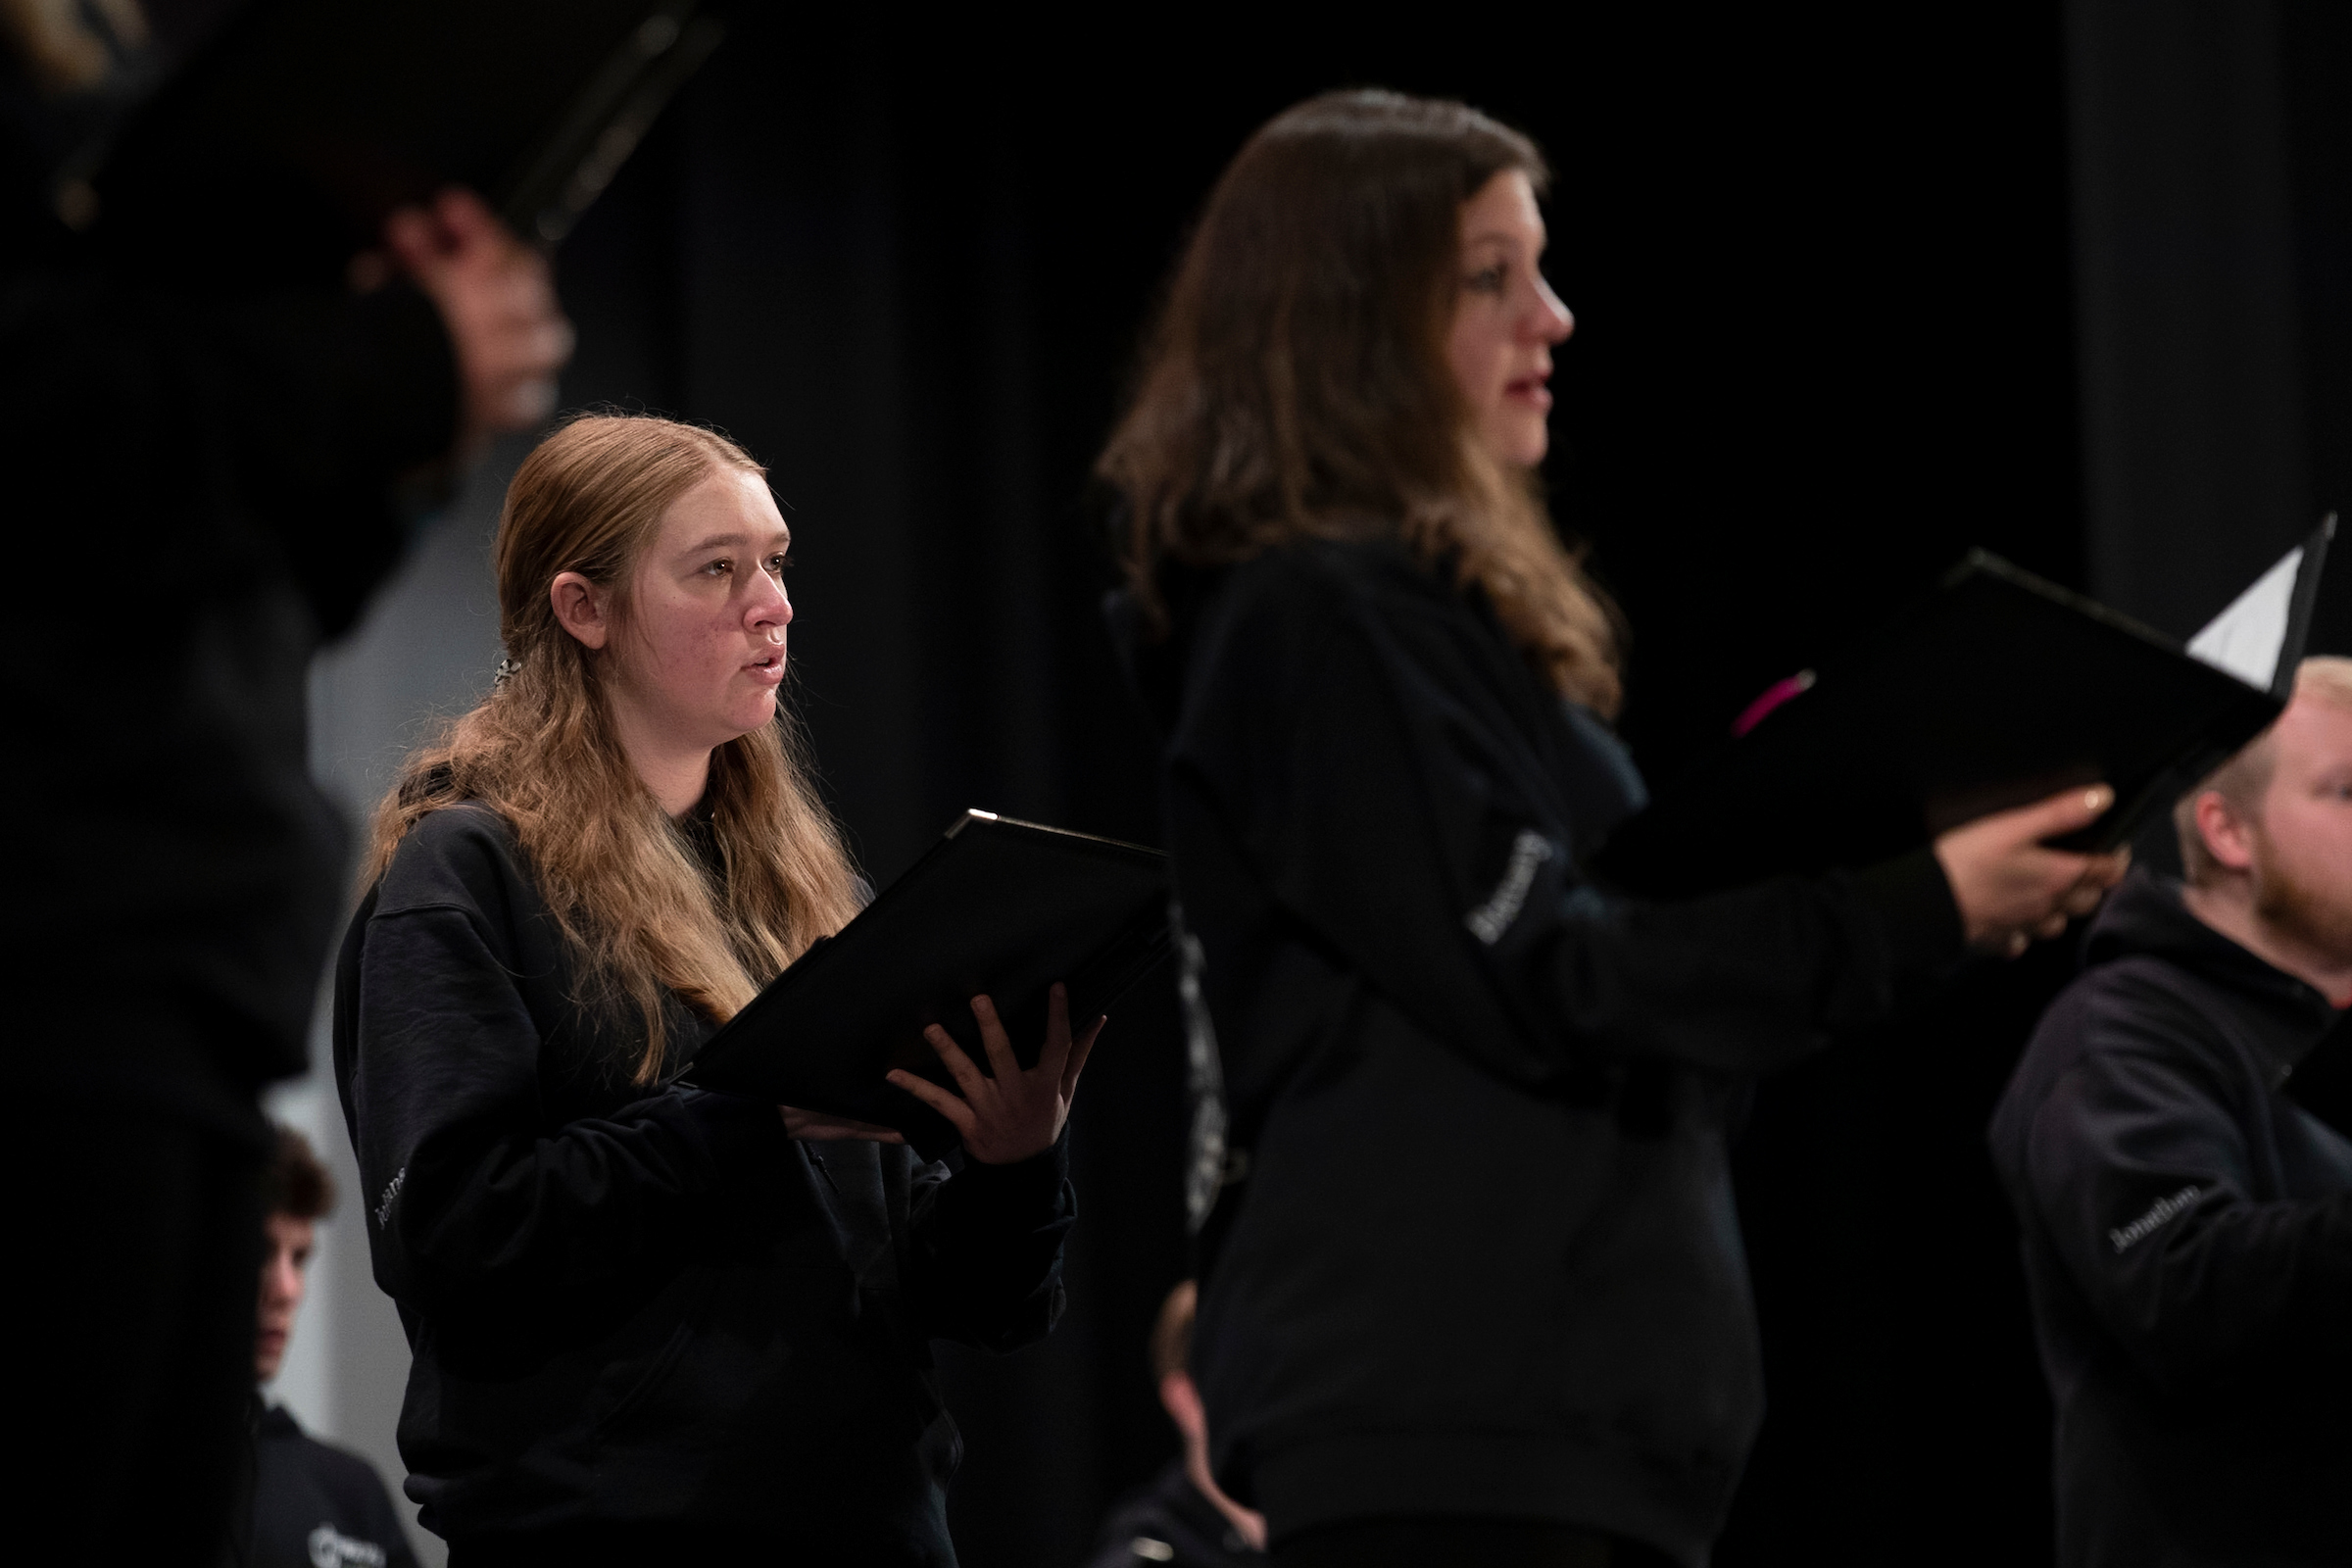 Worcester State University chorale members return to in-person performance in Sullivan Auditorium during the Spring 2022 Semester